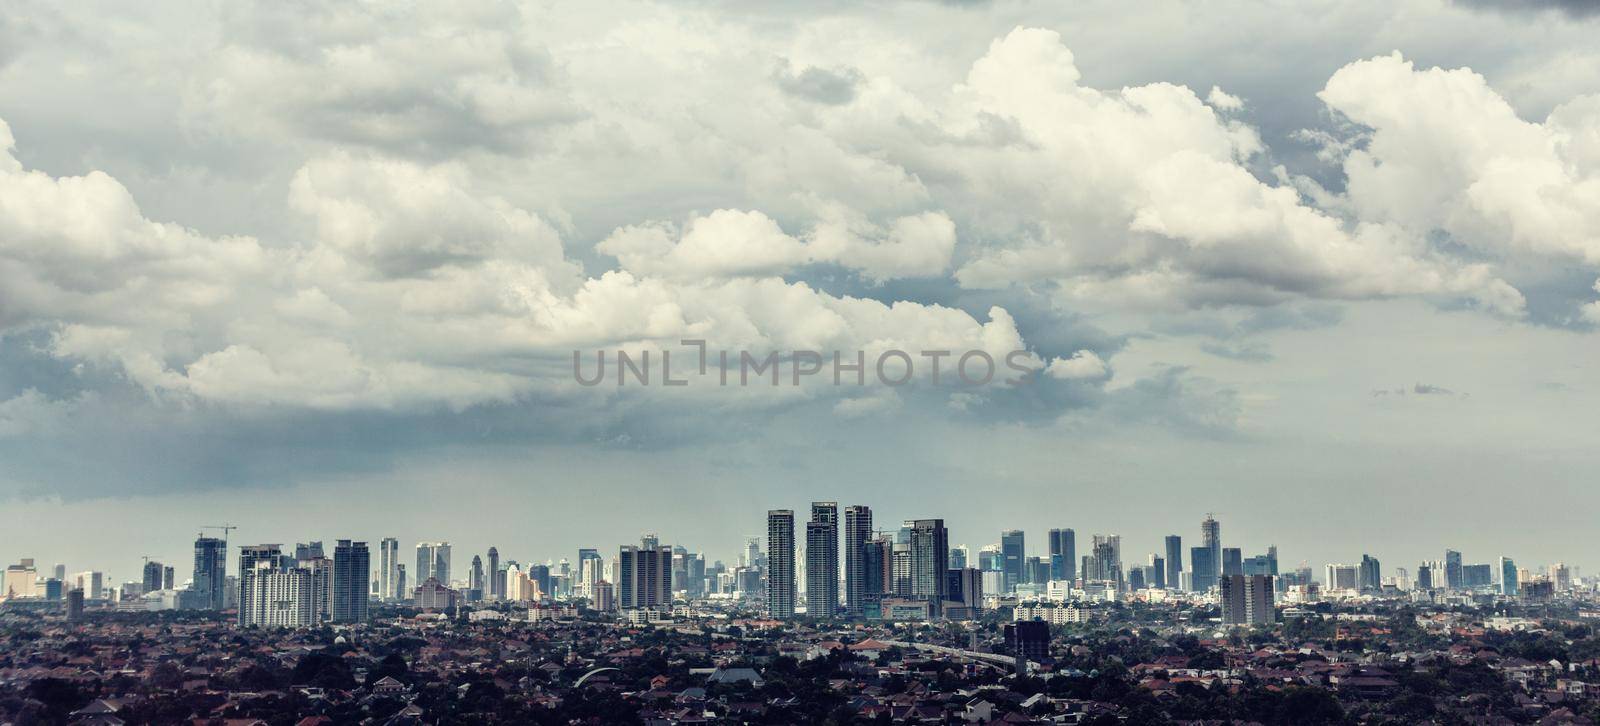 Jakarta city view with Kampung in foreground